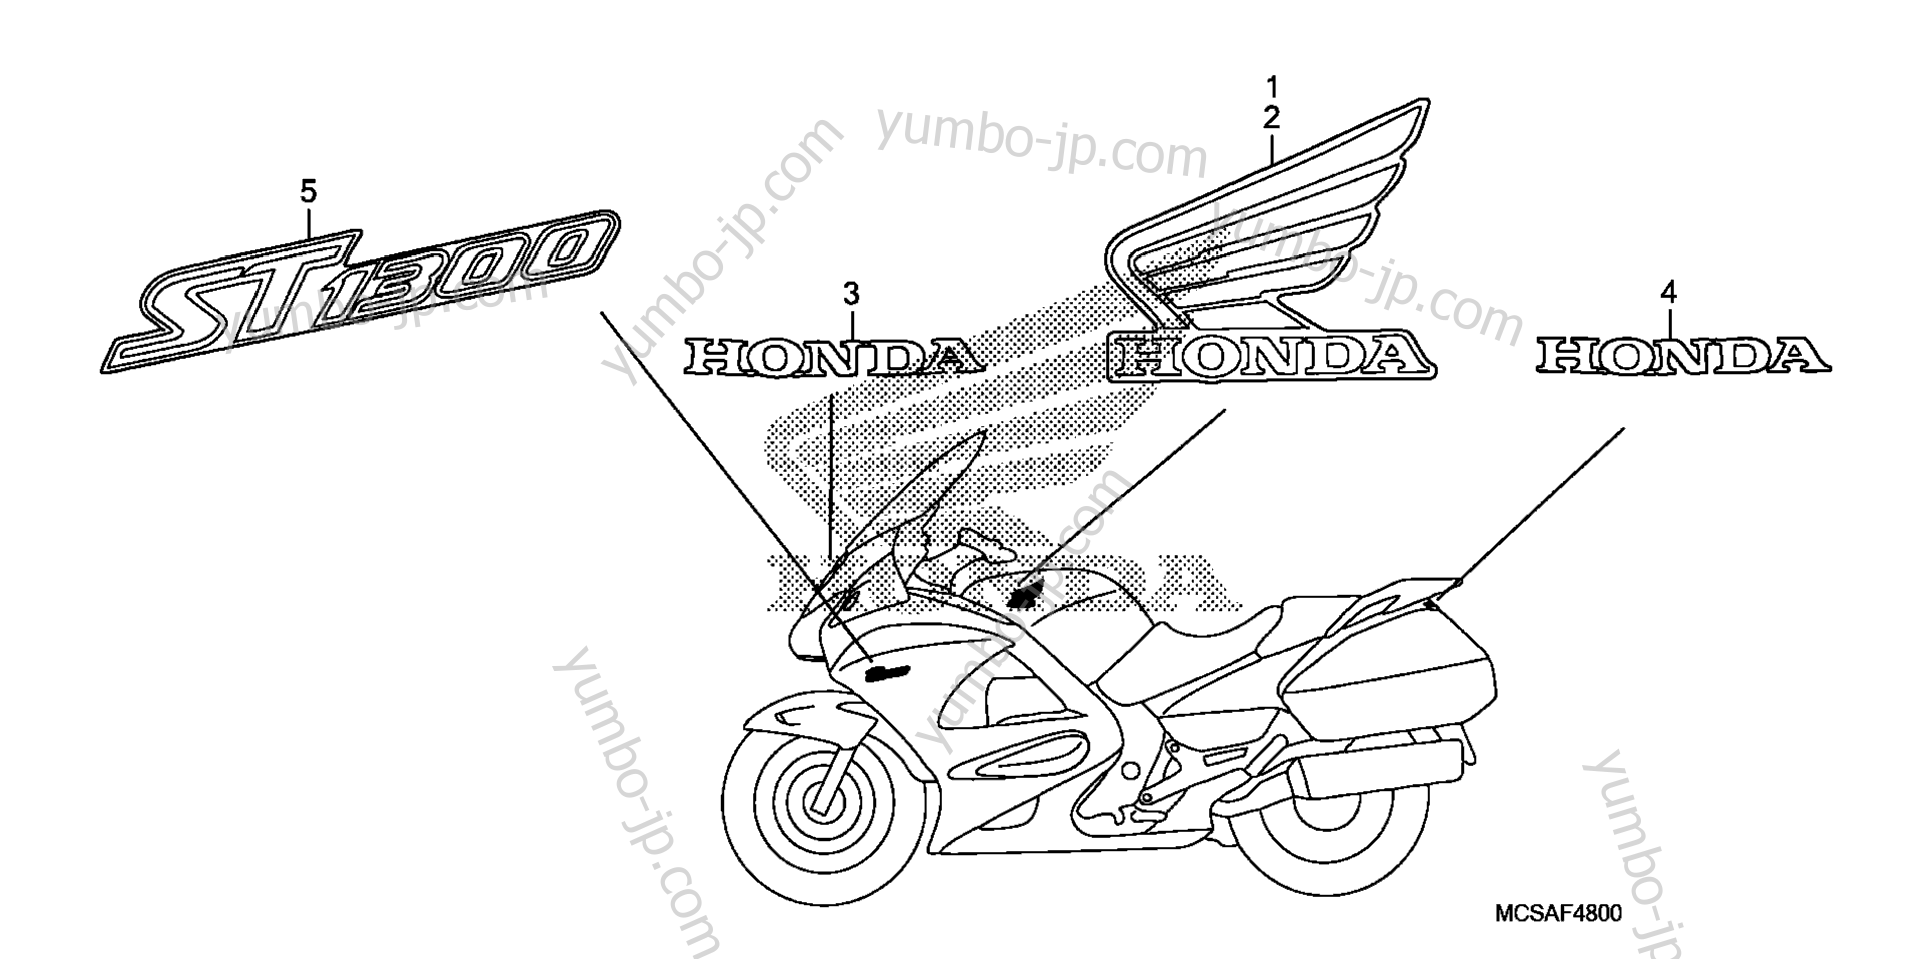 MARKS for motorcycles HONDA ST1300A A 2008 year